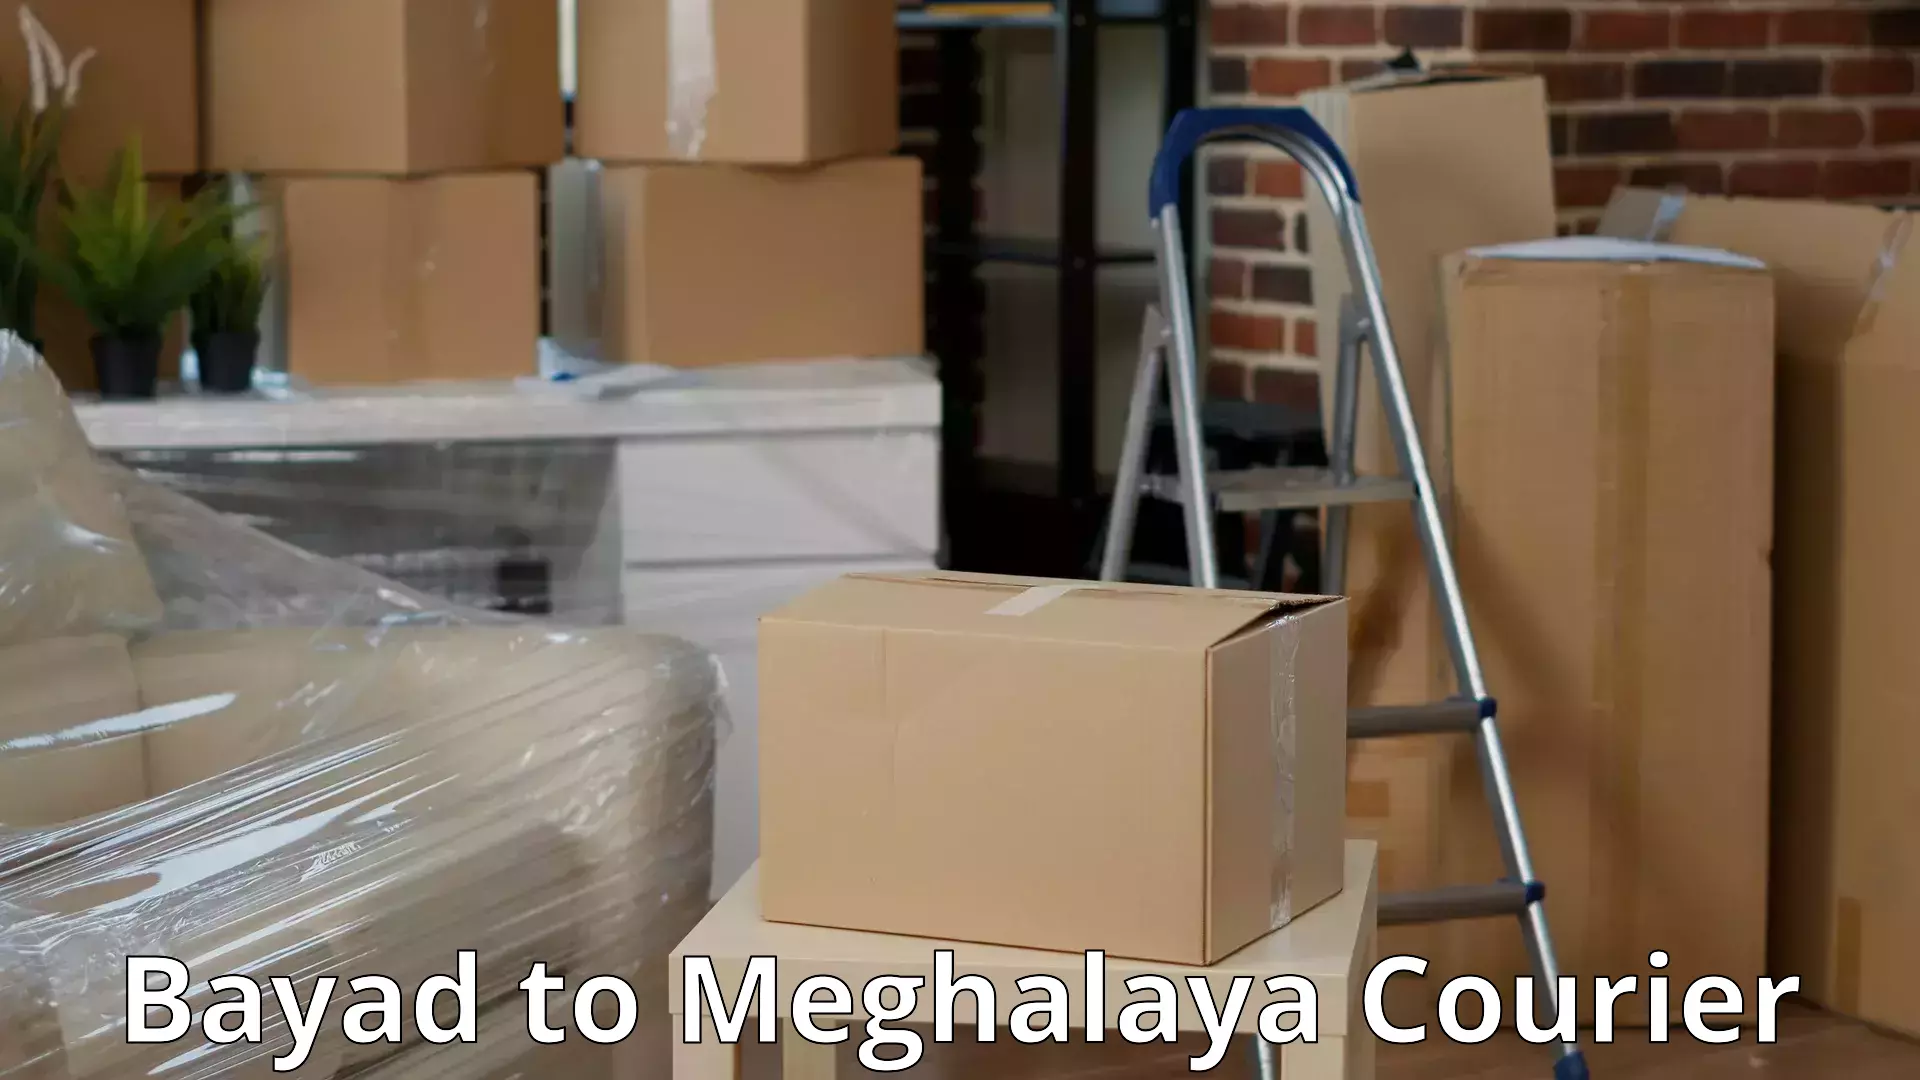 Efficient home goods movers in Bayad to Meghalaya